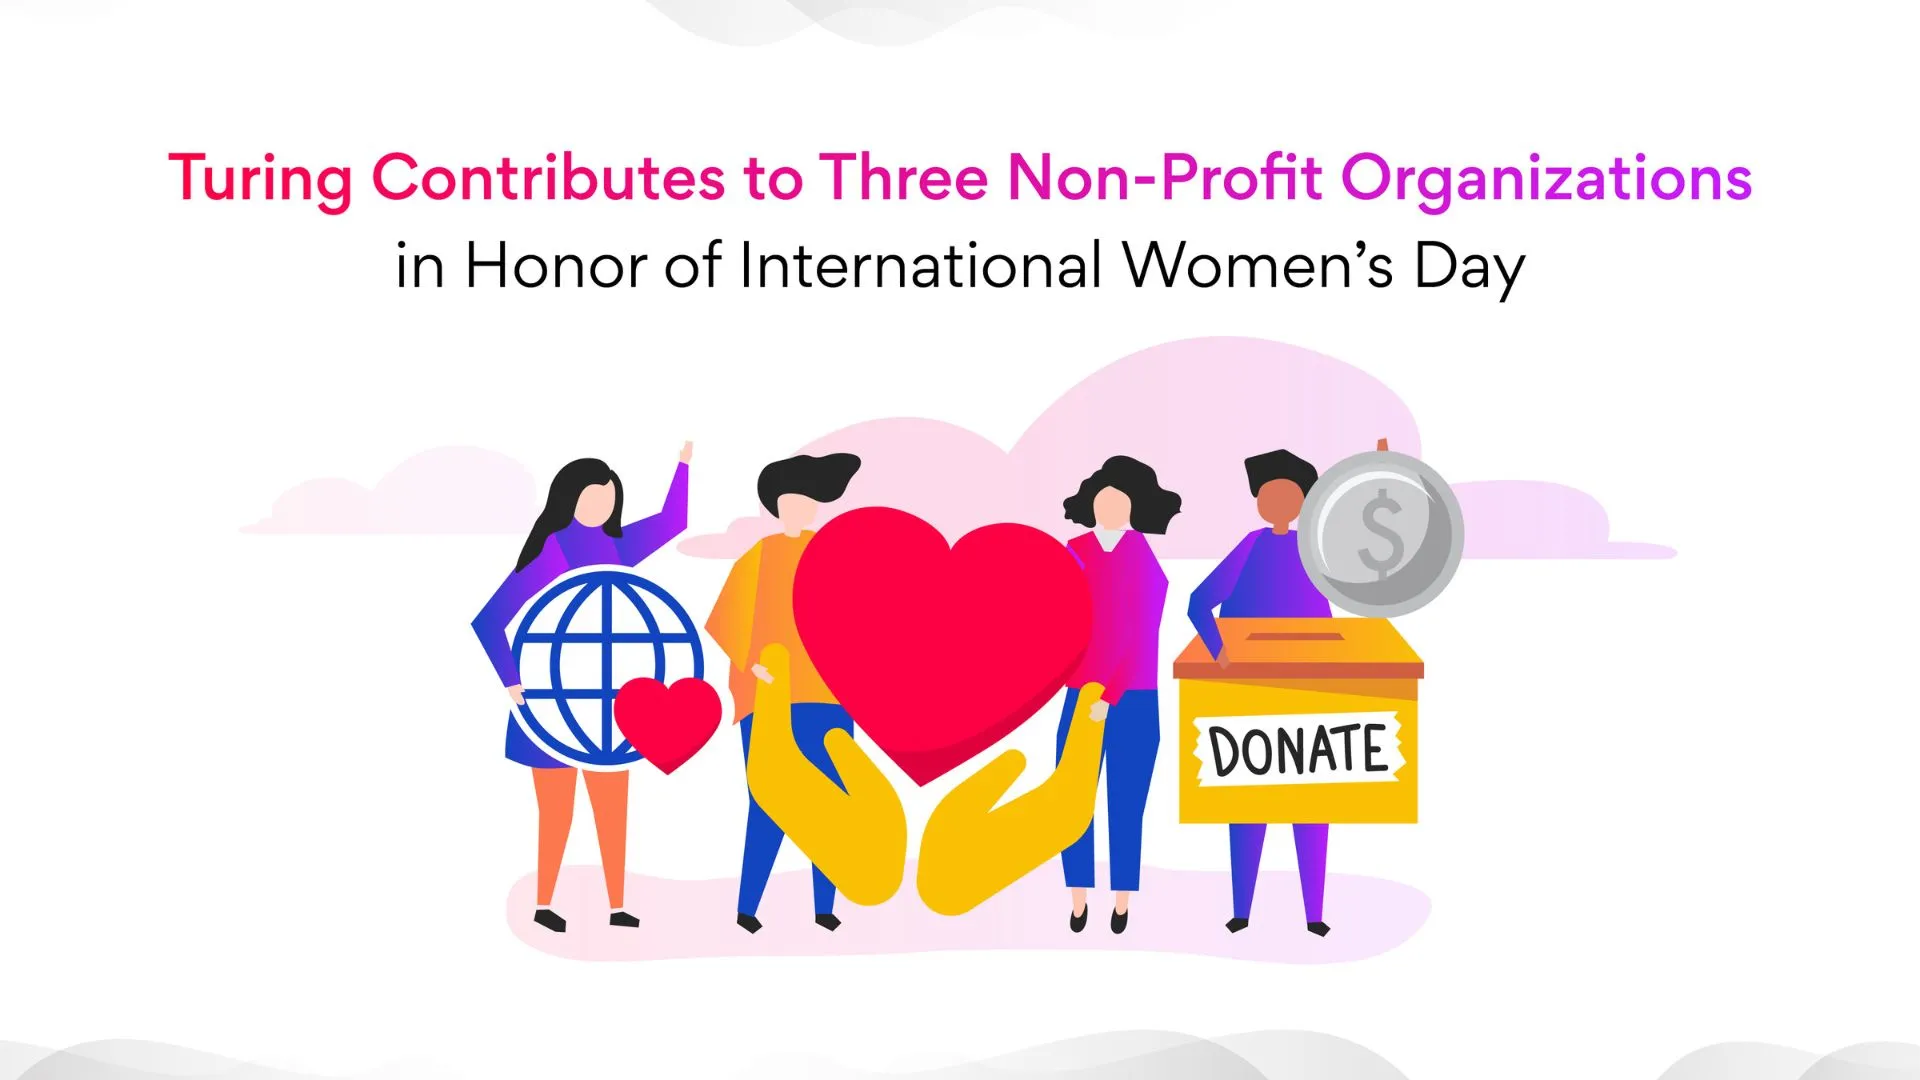 Turing Contributes to Three Non-Profit Organizations in Honor of International Women’s Day